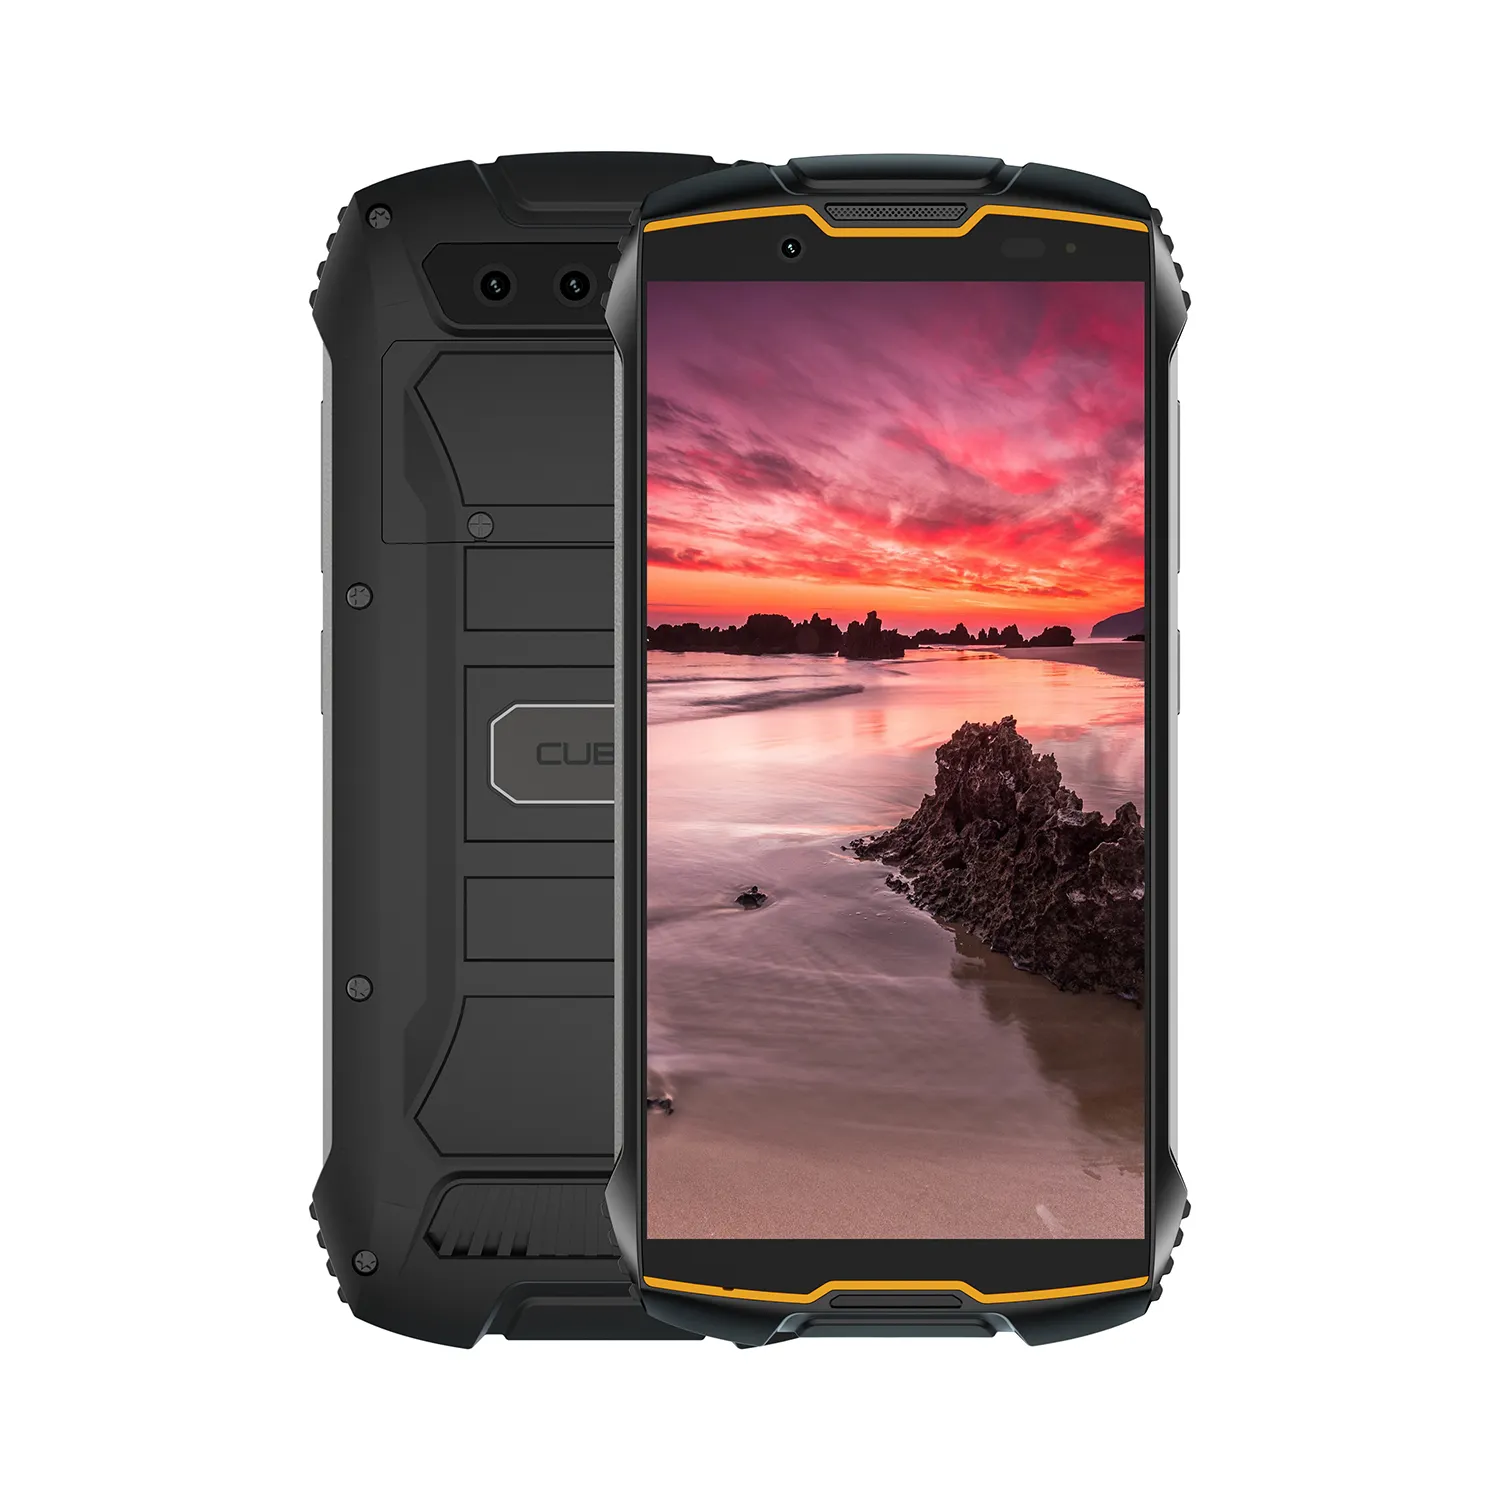 Cubot Kingkong Mini 2 Pro Small Rugged phone 4 inch mobile phone powered by Android 11 System with 3000mAh Battery smart phone